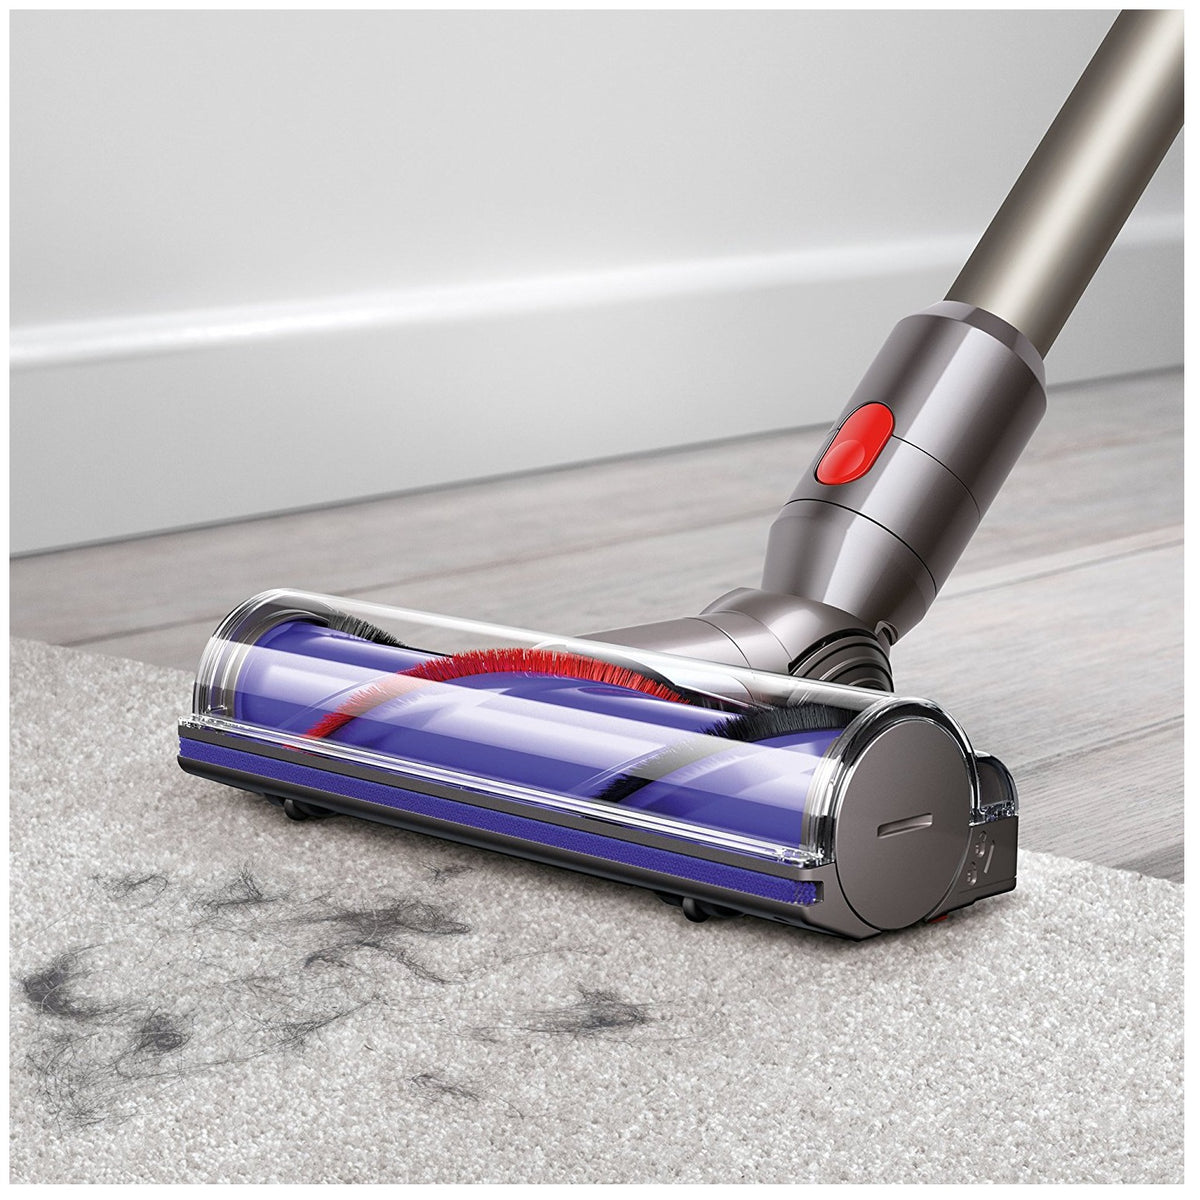 Buy dyson 229602-01 - Online store for vacuums & floor equipment, stick in USA, on sale, low price, discount deals, coupon code